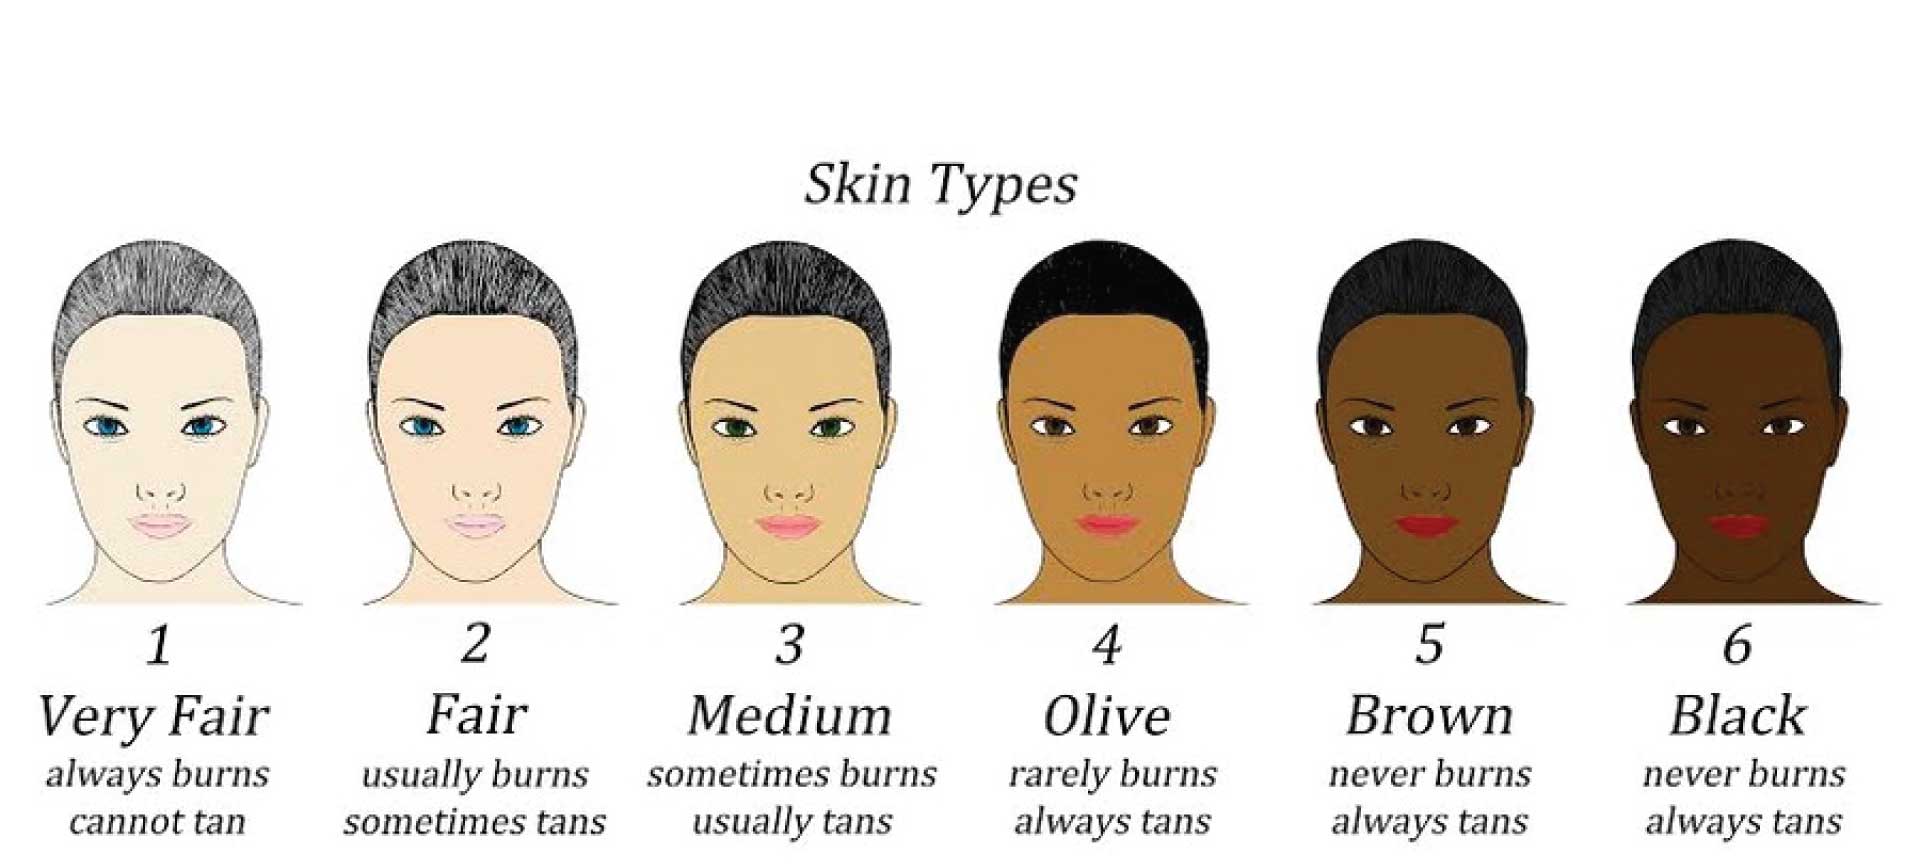 Clinical Notes: Set Yourself Apart and Get Optimal Results by Mastering the Skin Type System